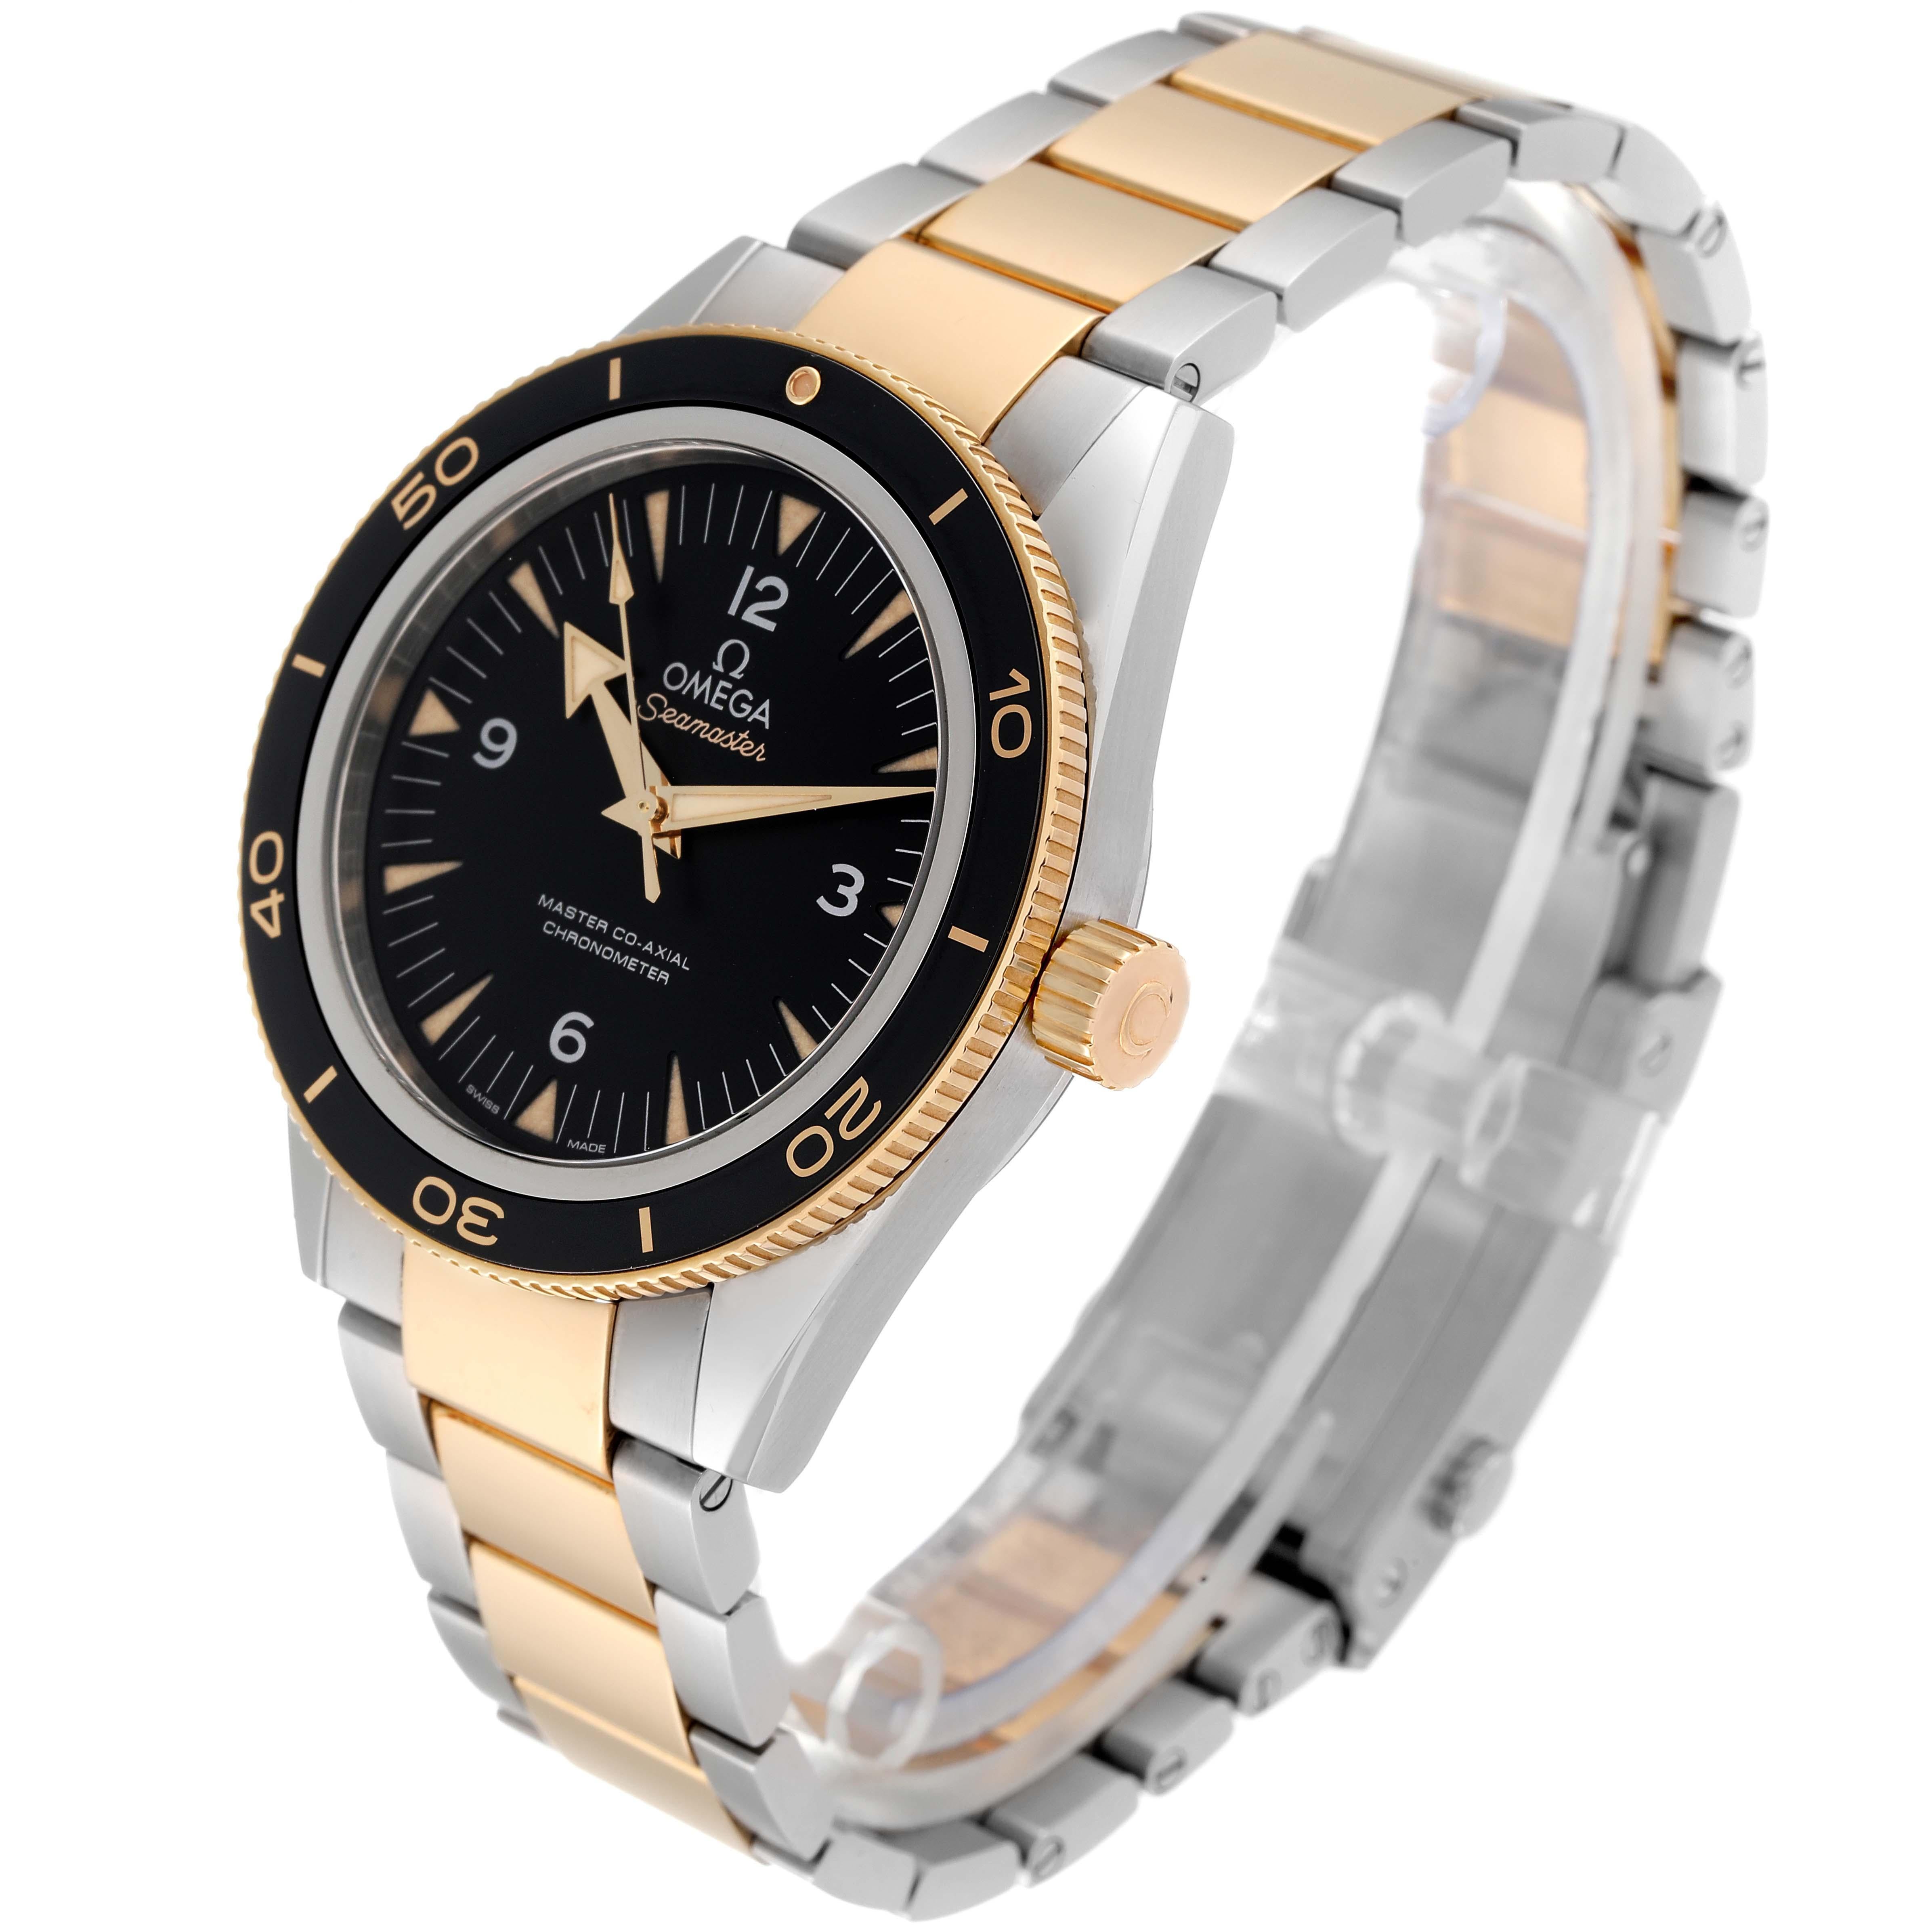 Omega Seamaster 300M Steel Yellow Gold Mens Watch 233.20.41.21.01.002 Card Pour hommes en vente